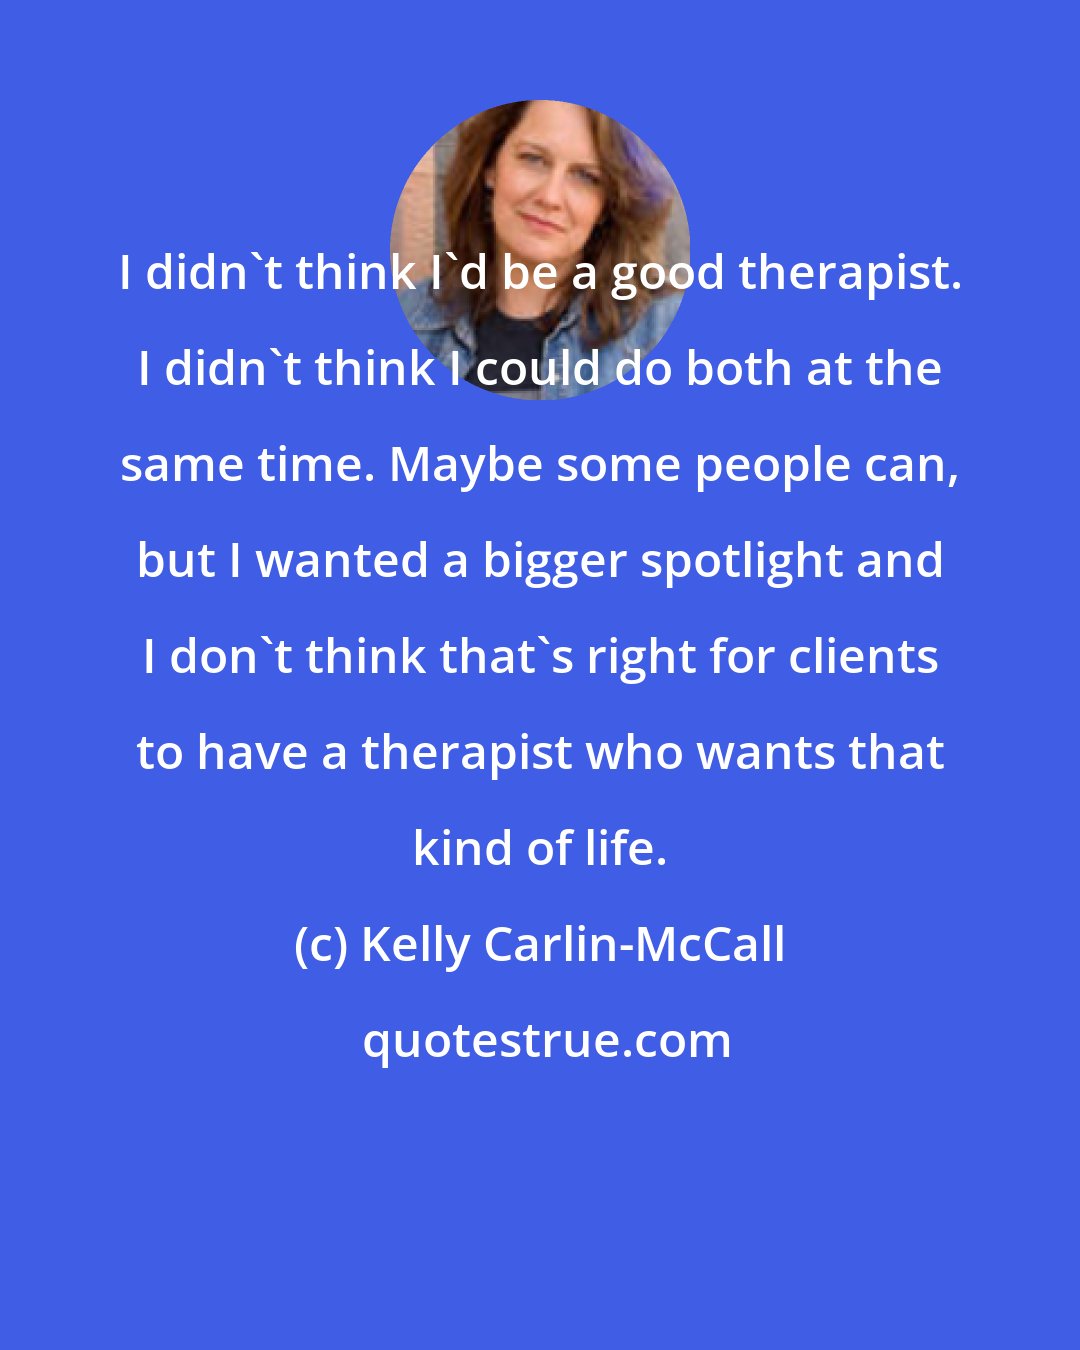 Kelly Carlin-McCall: I didn't think I'd be a good therapist. I didn't think I could do both at the same time. Maybe some people can, but I wanted a bigger spotlight and I don't think that's right for clients to have a therapist who wants that kind of life.